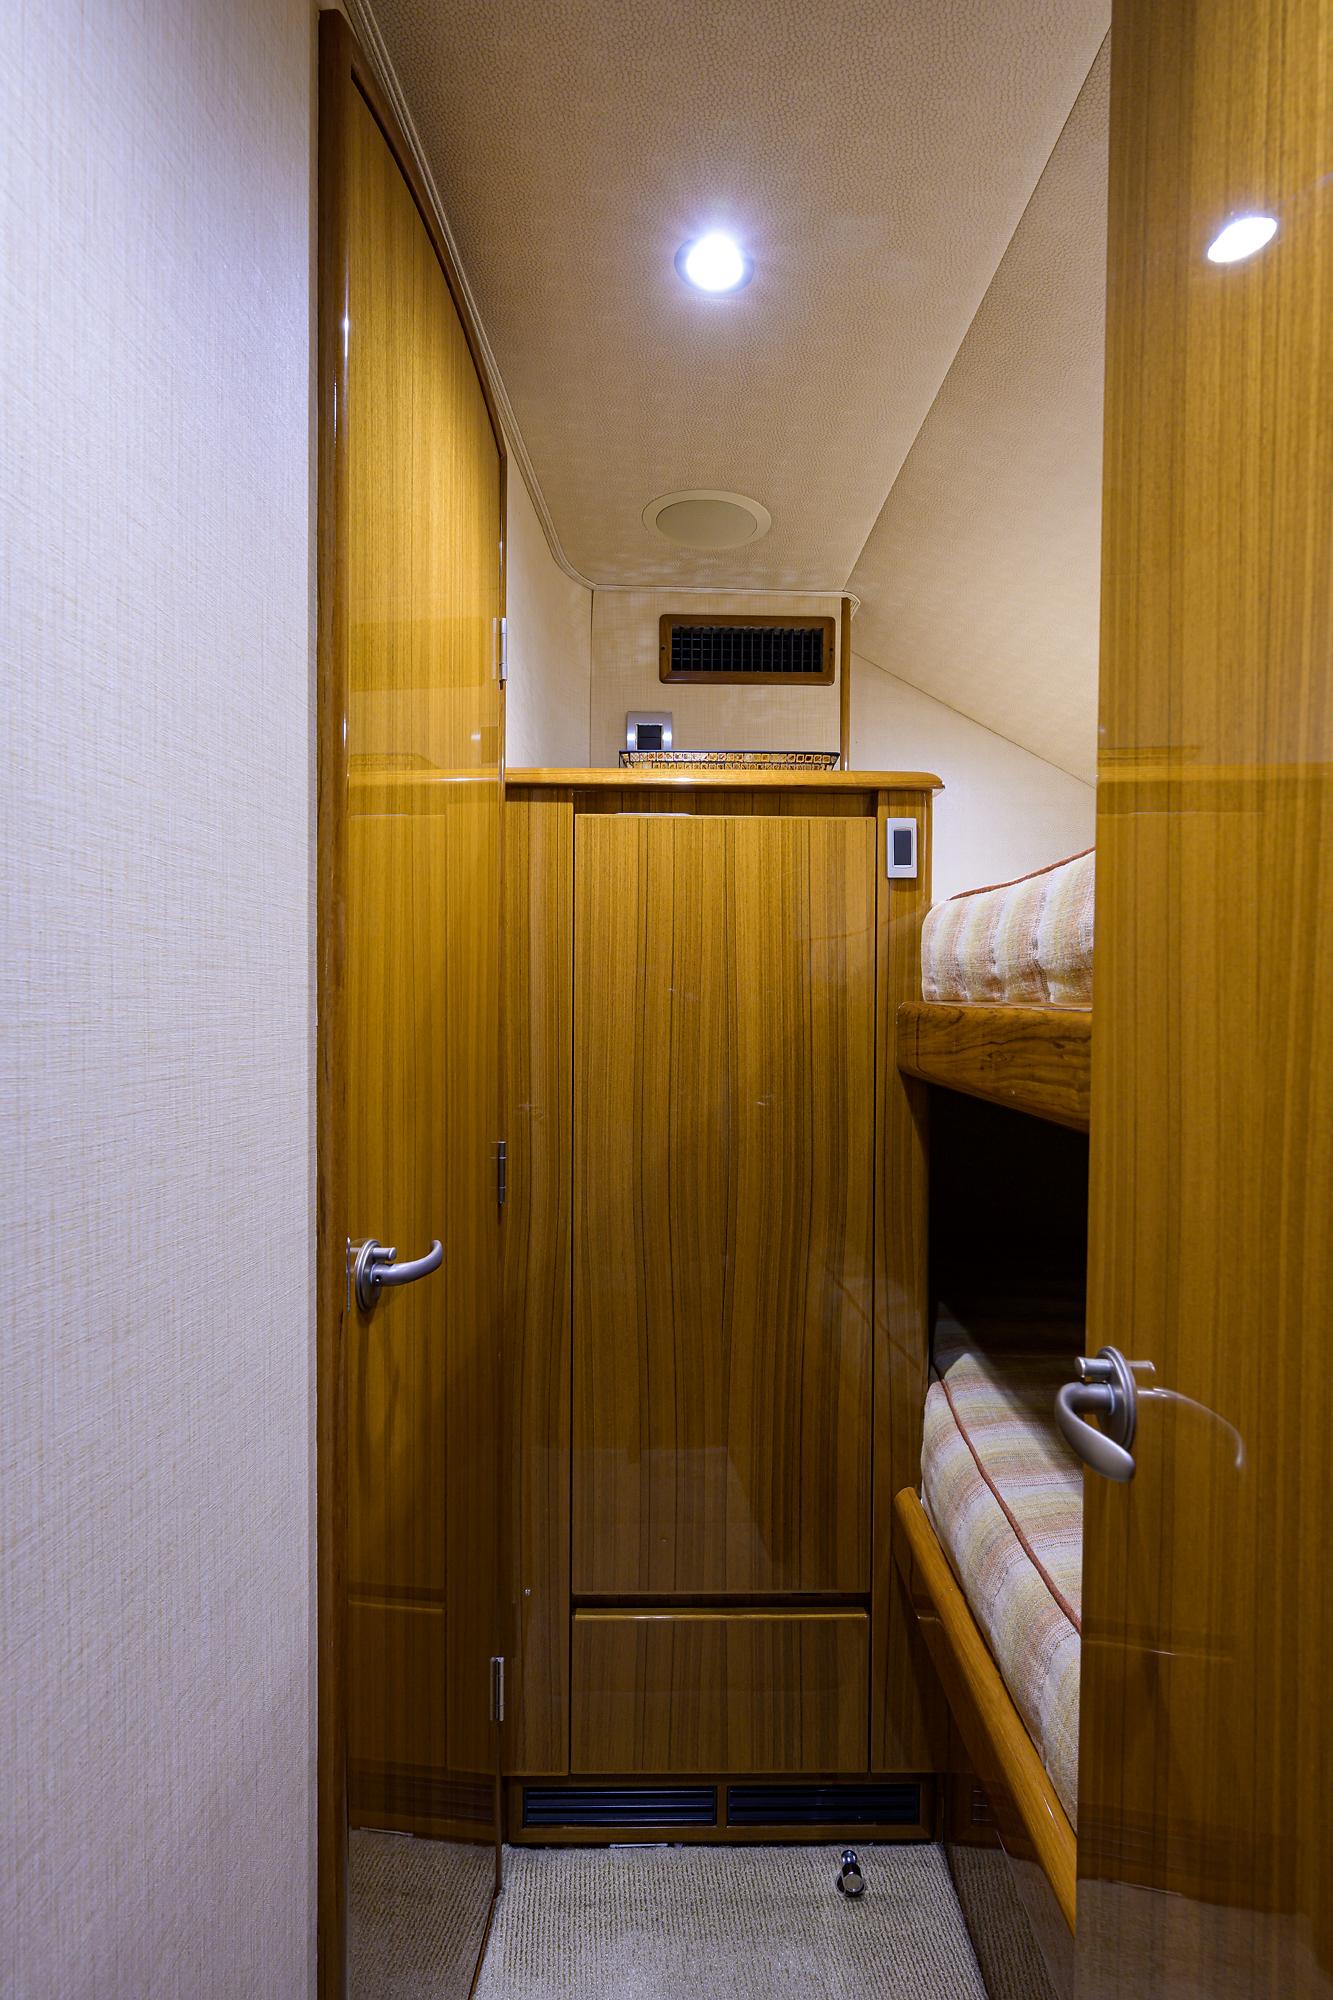 Viking 52 Outrage - Interior Stateroom